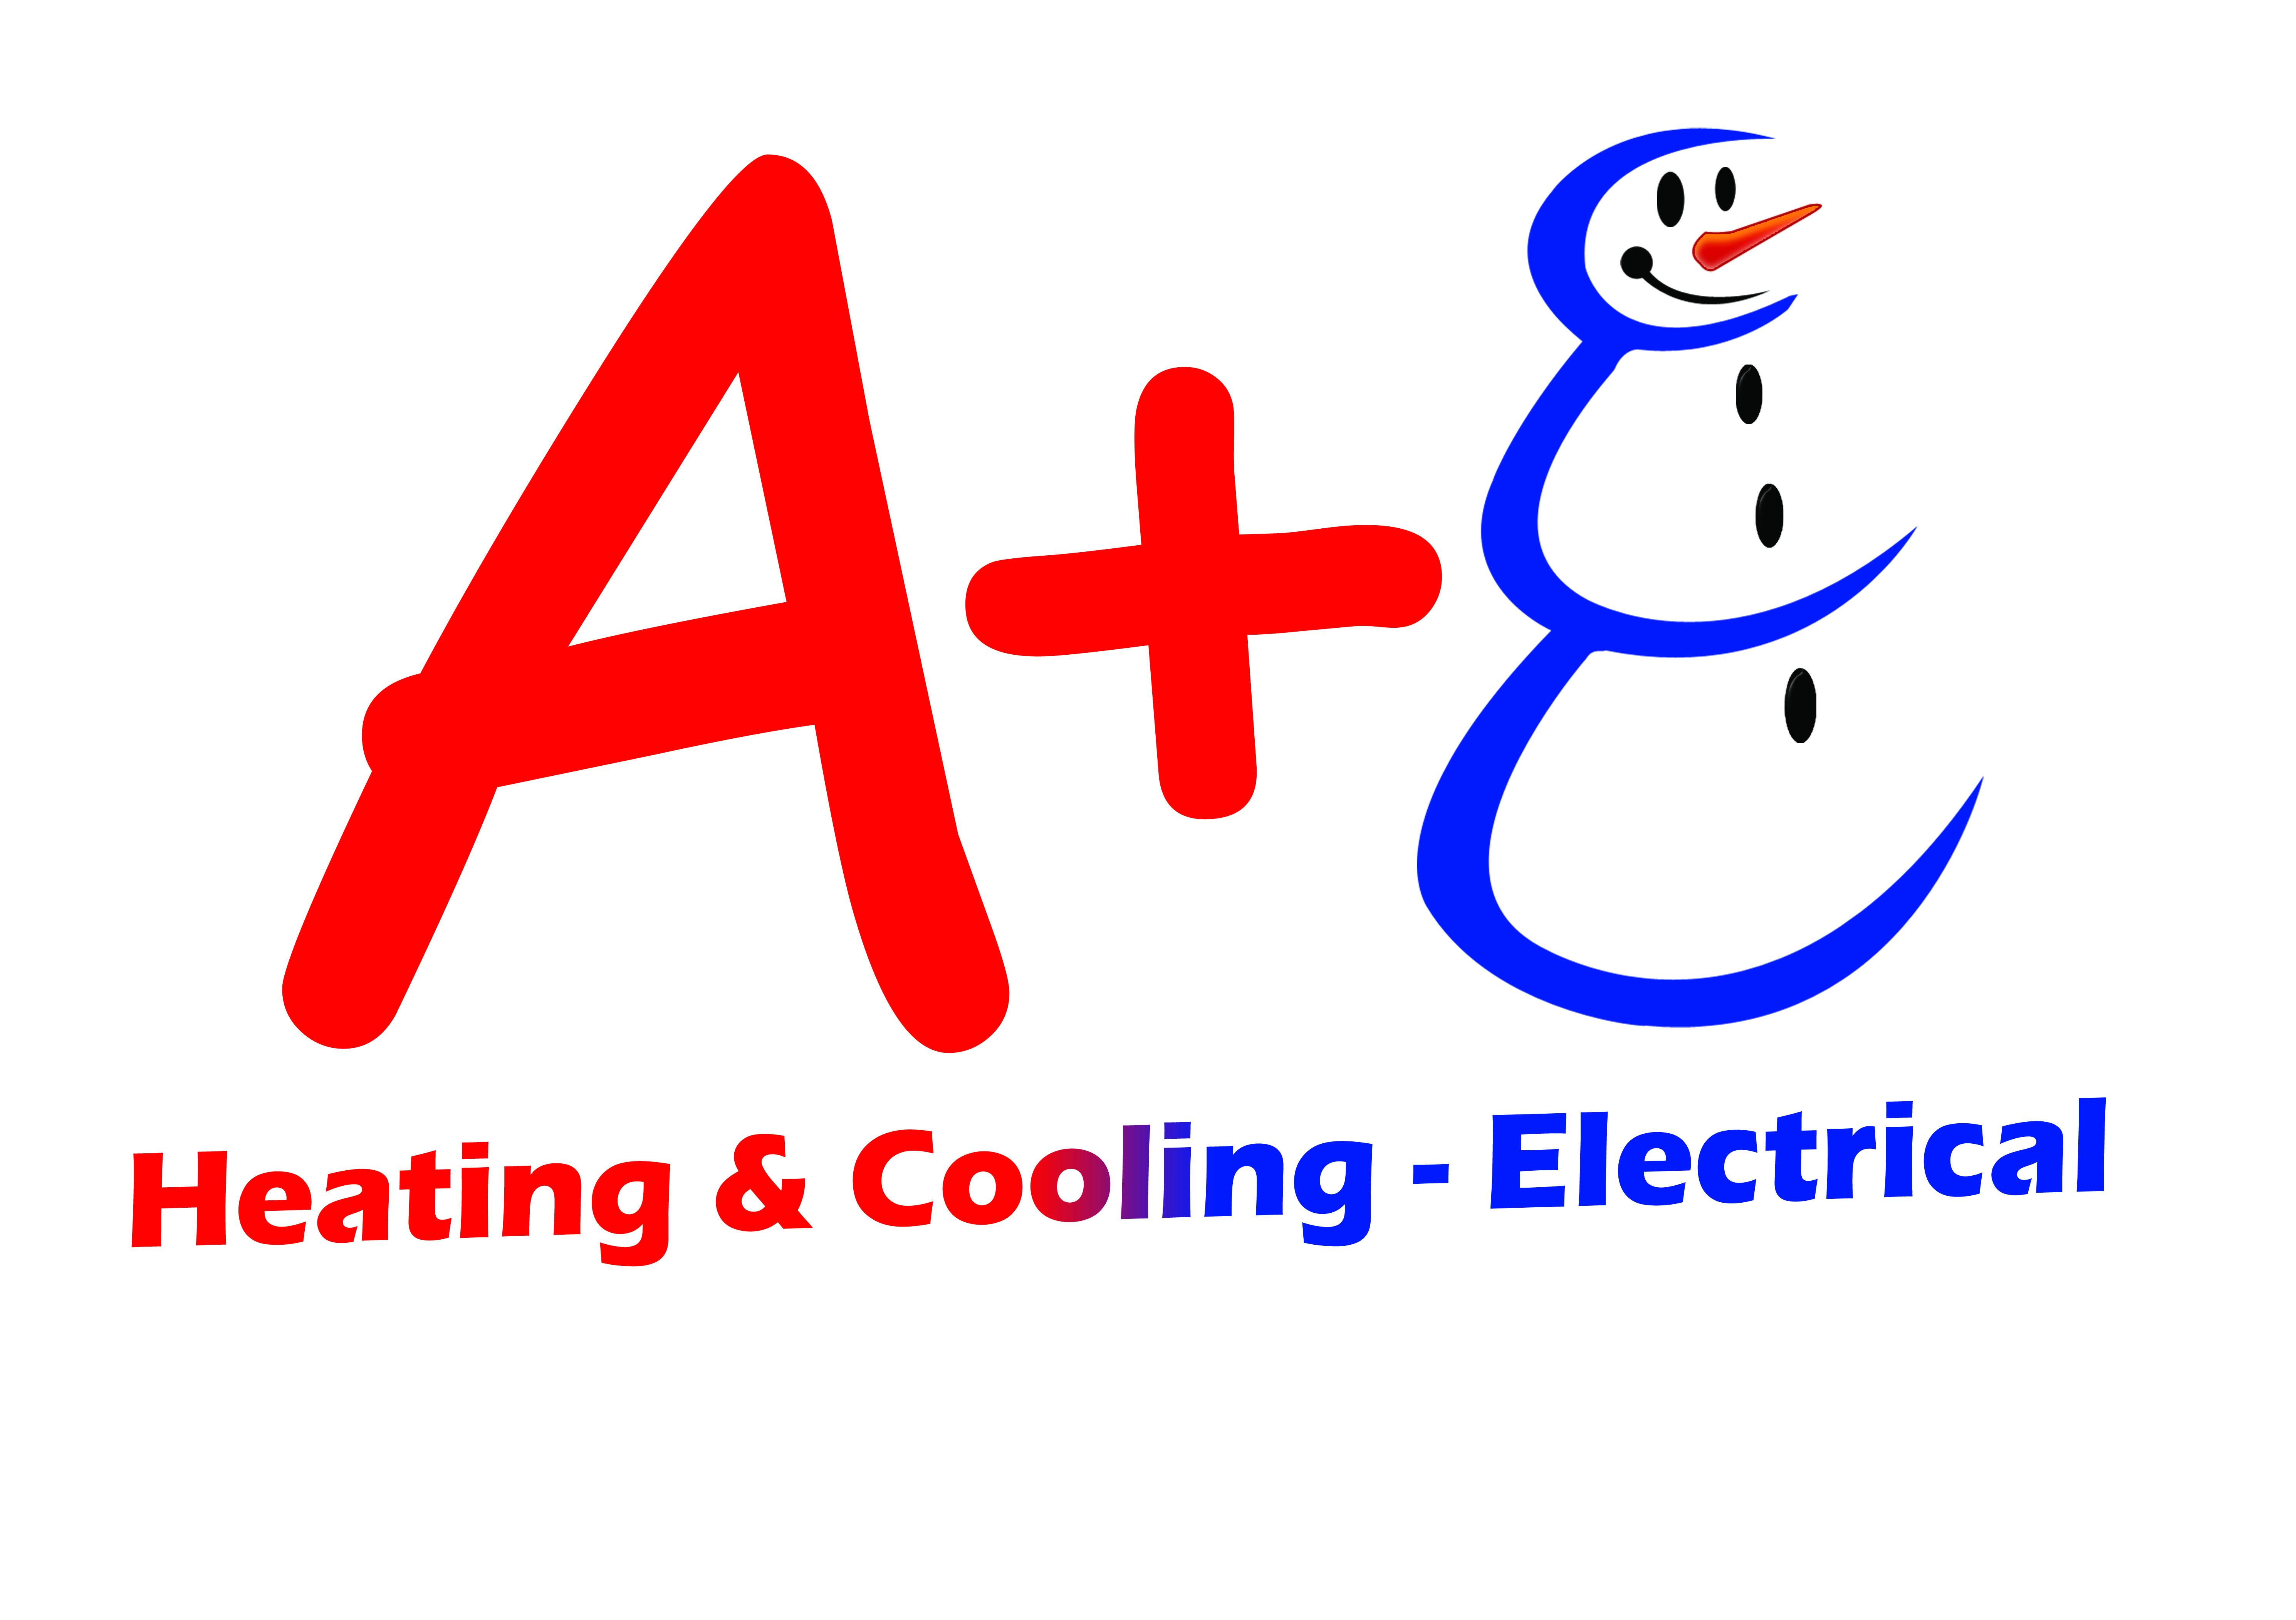 A+ Heating & Cooling - Electrical Logo